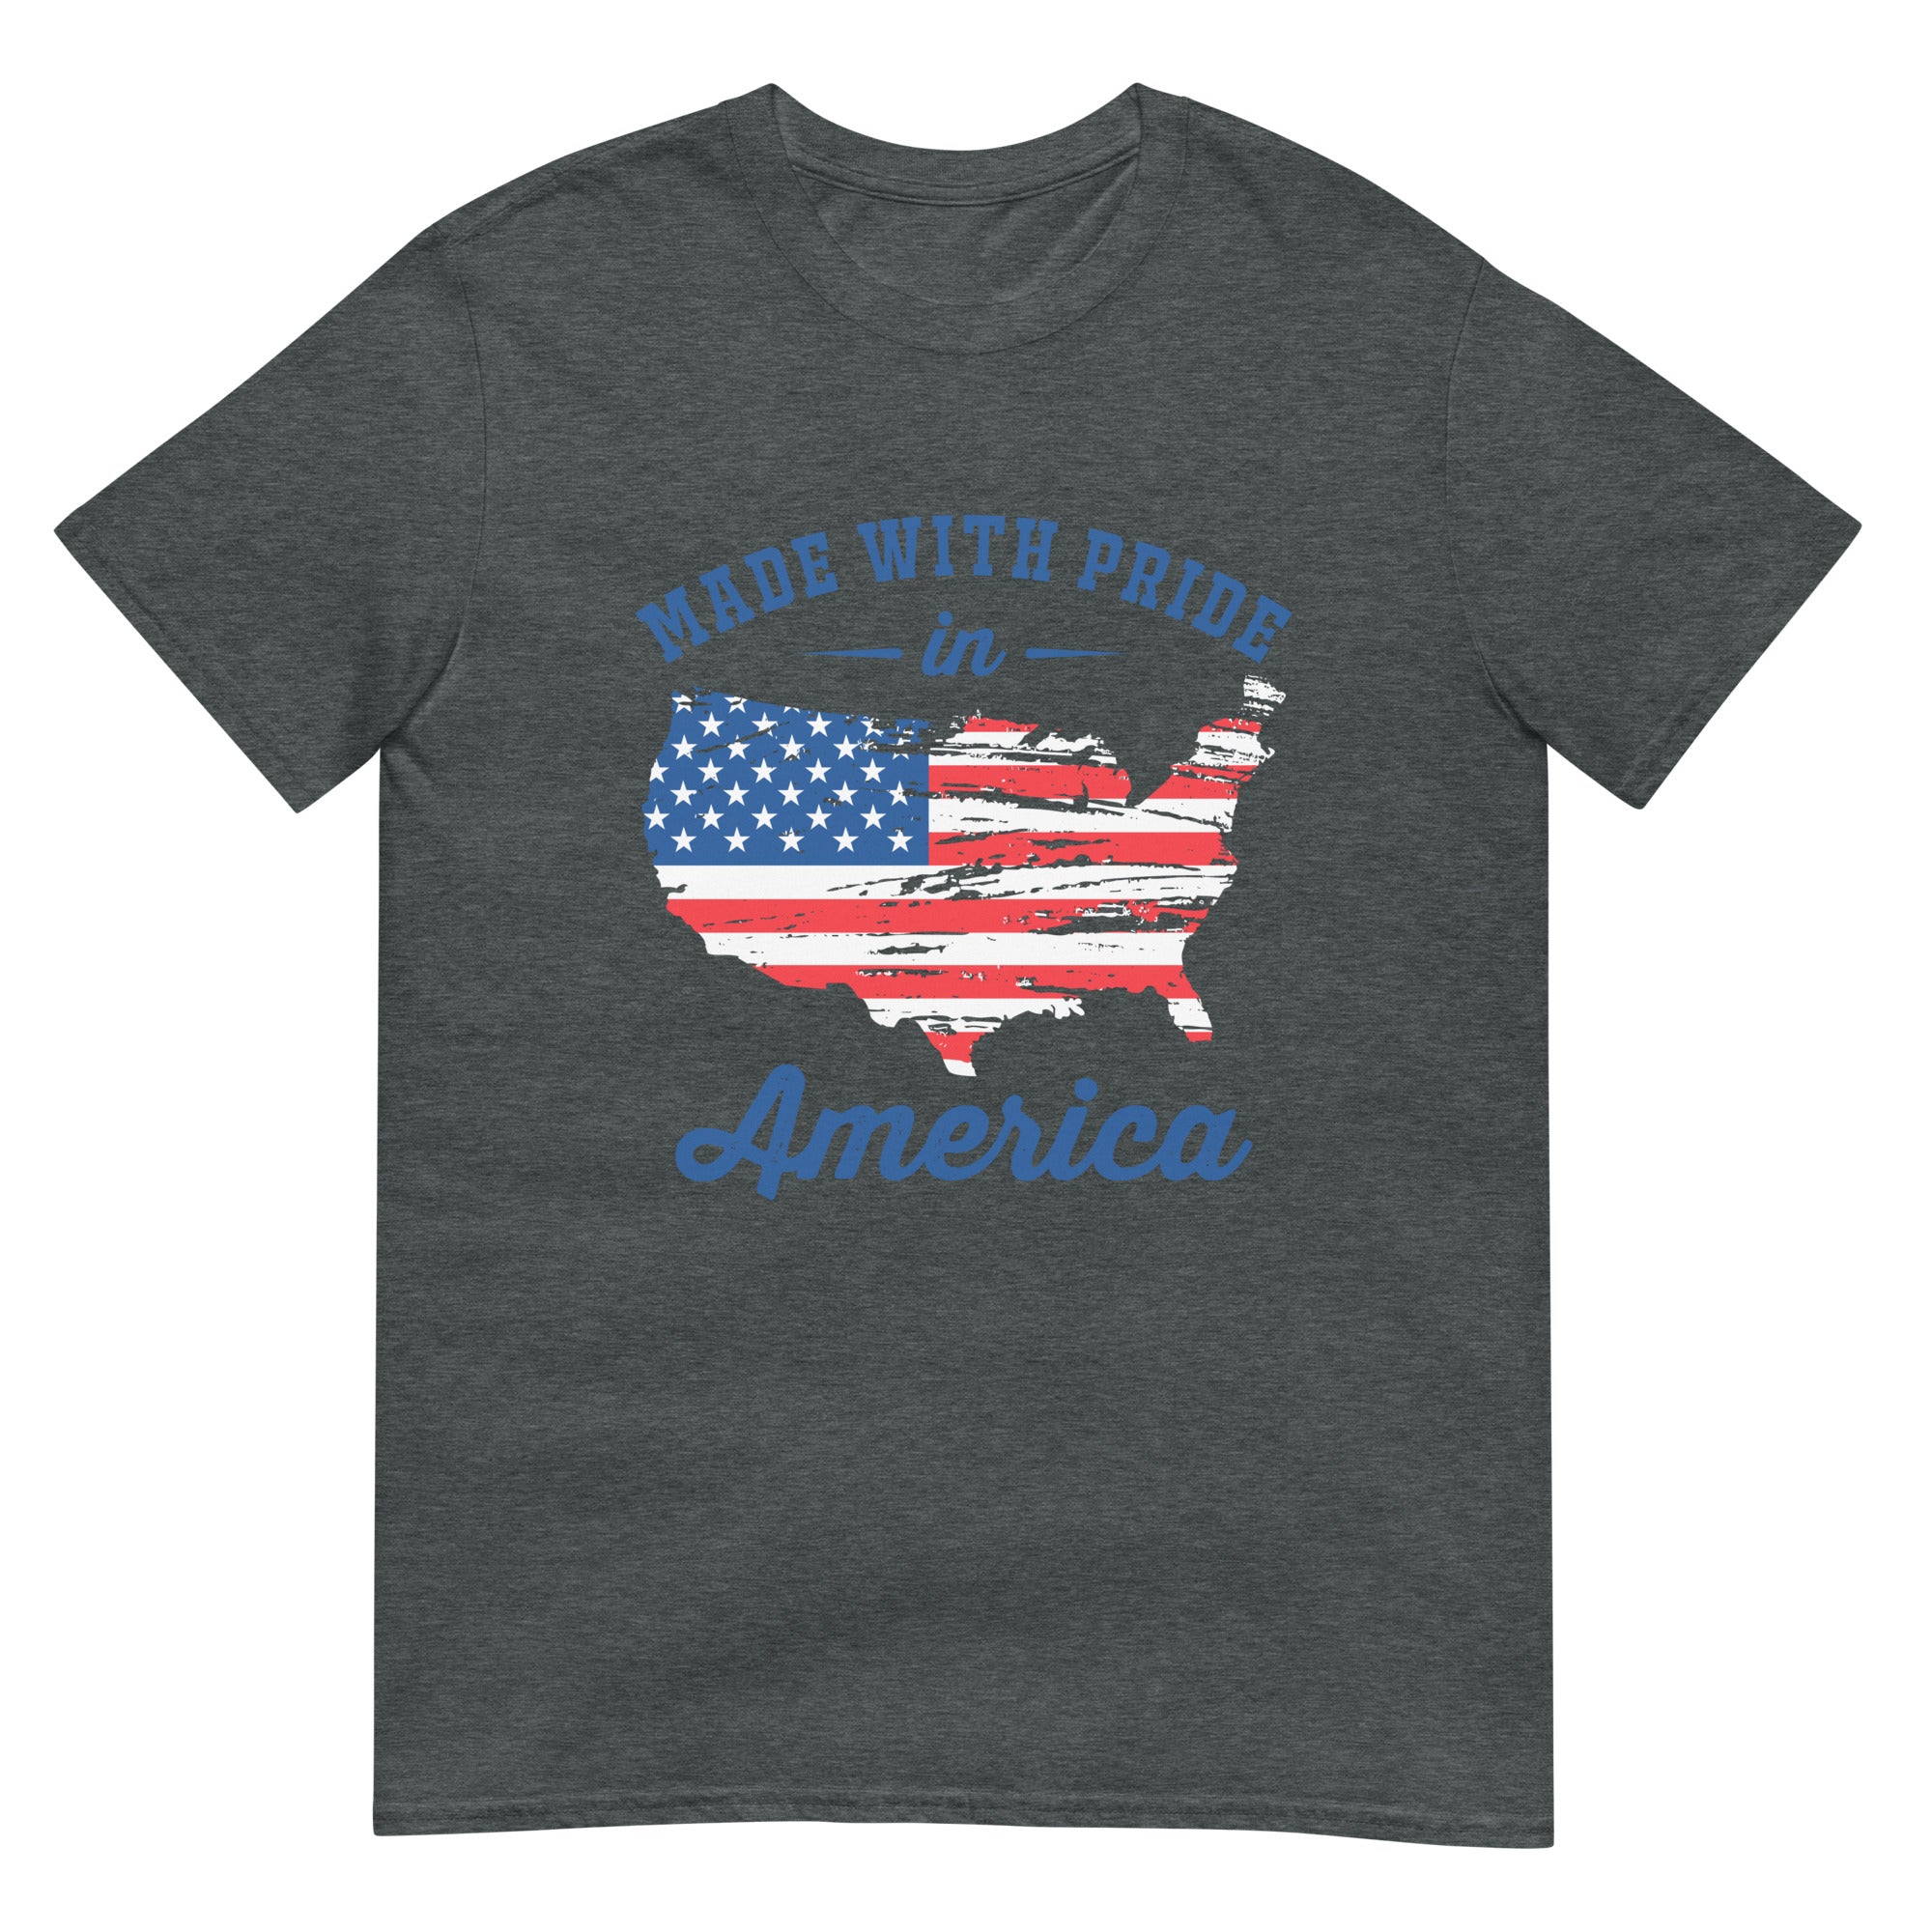 Made with Pride in America Short-Sleeve Unisex T-Shirt